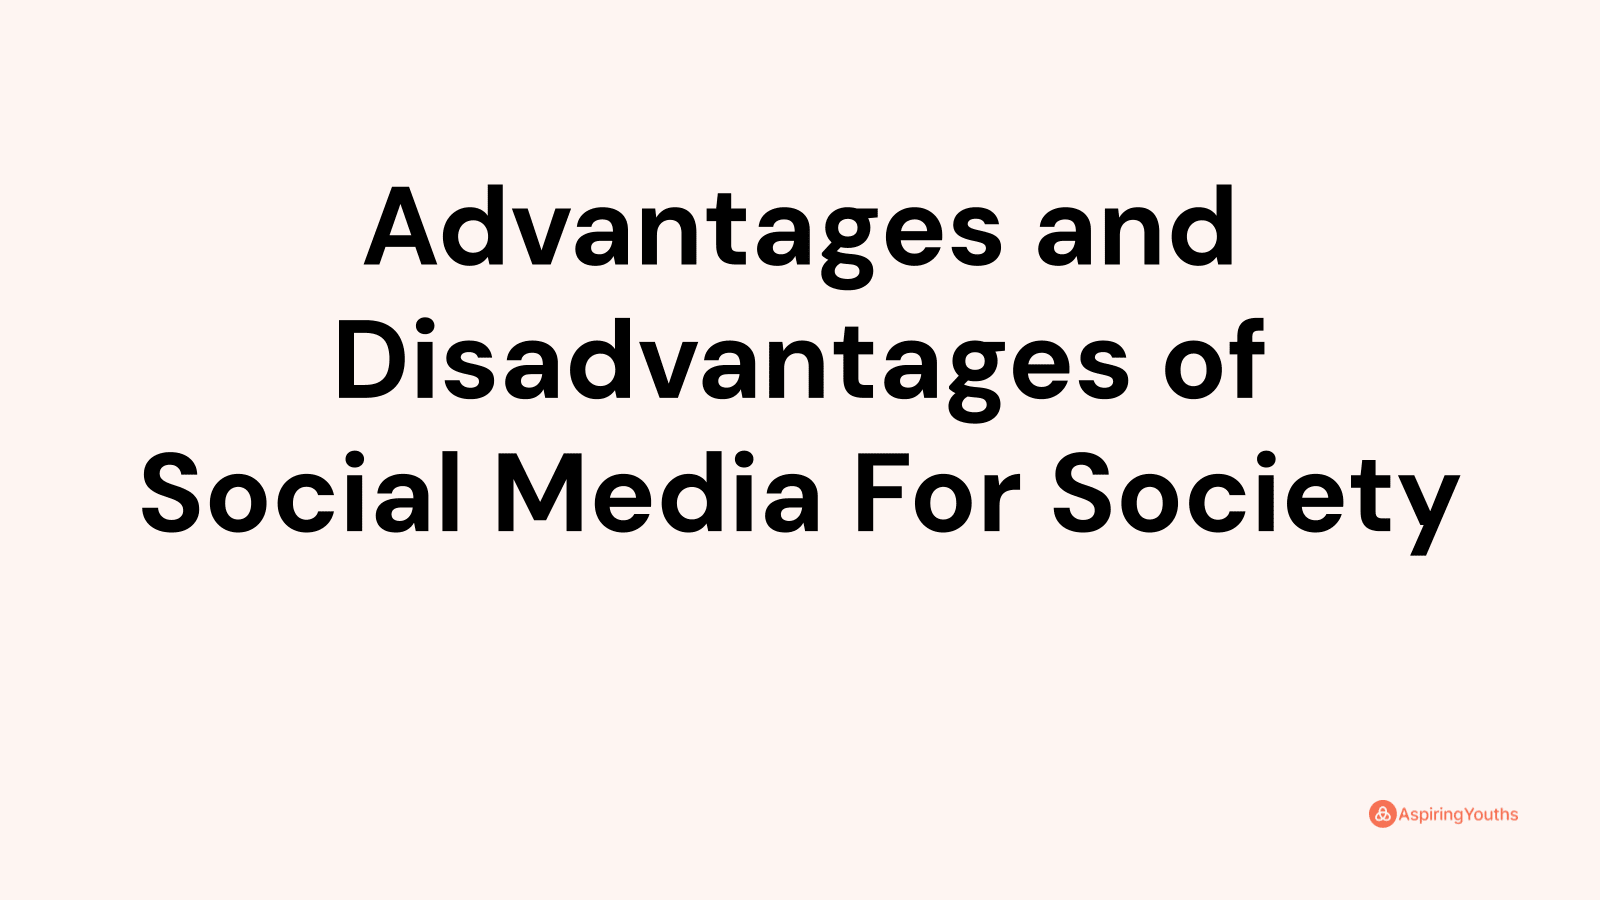 Advantages and disadvantages of Social Media For Society